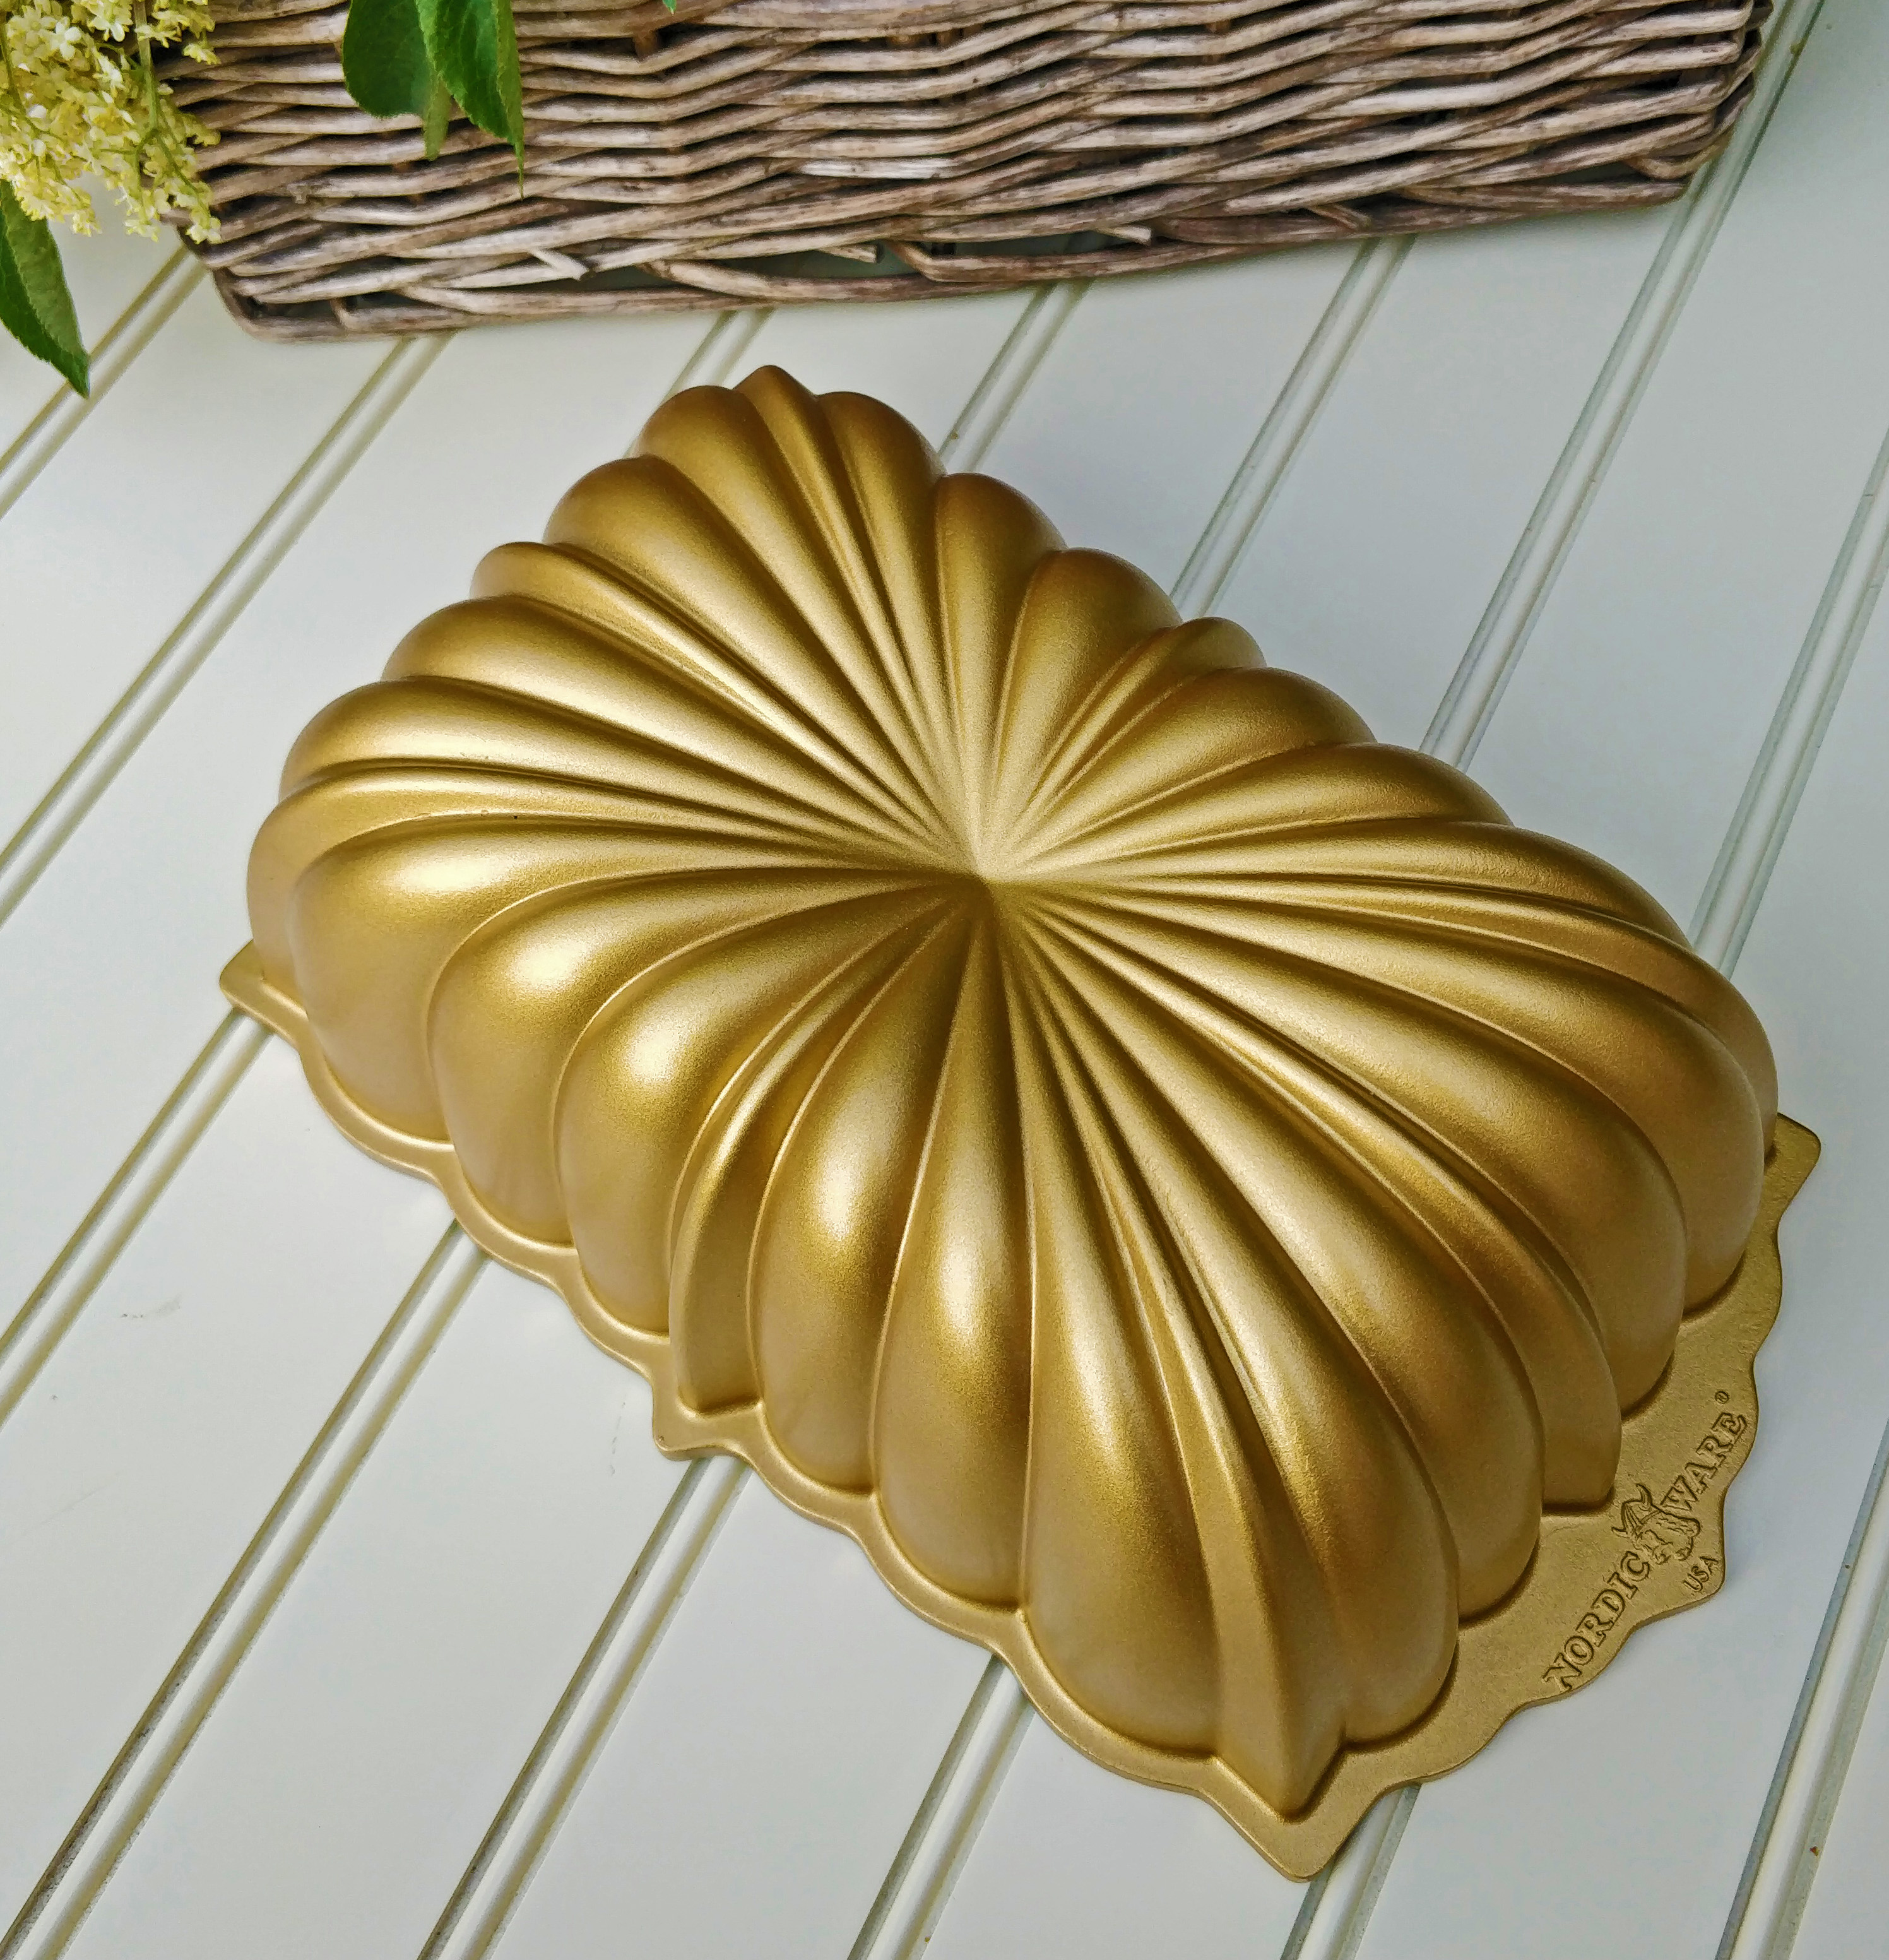 Nordic Ware Fluted Loaf Pan